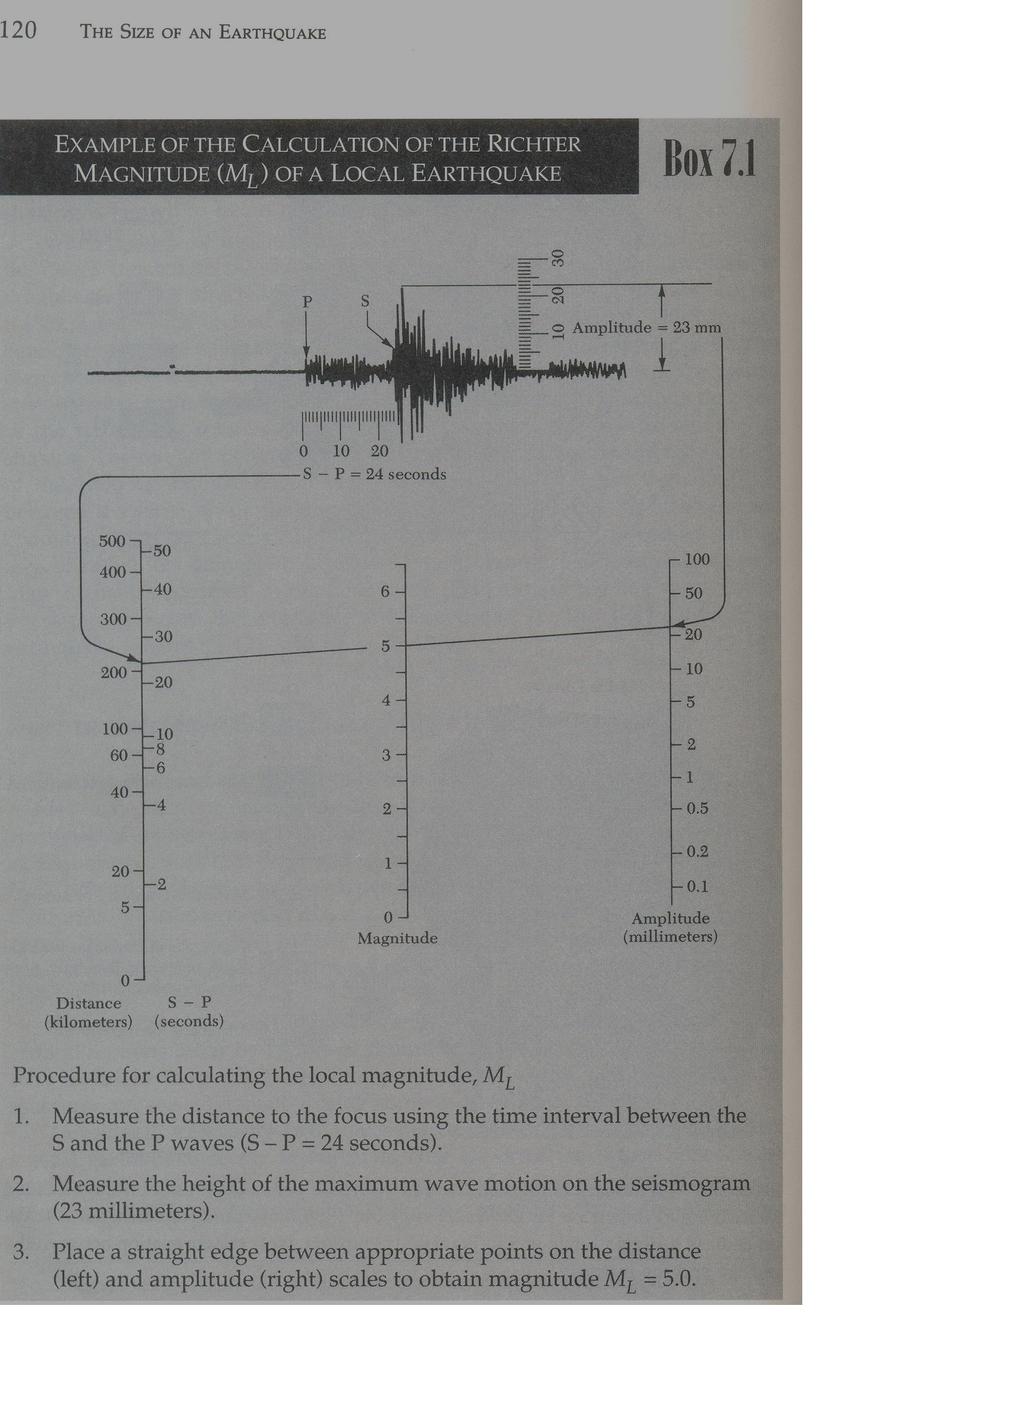 Calculation of the Richter Magnitude, ML